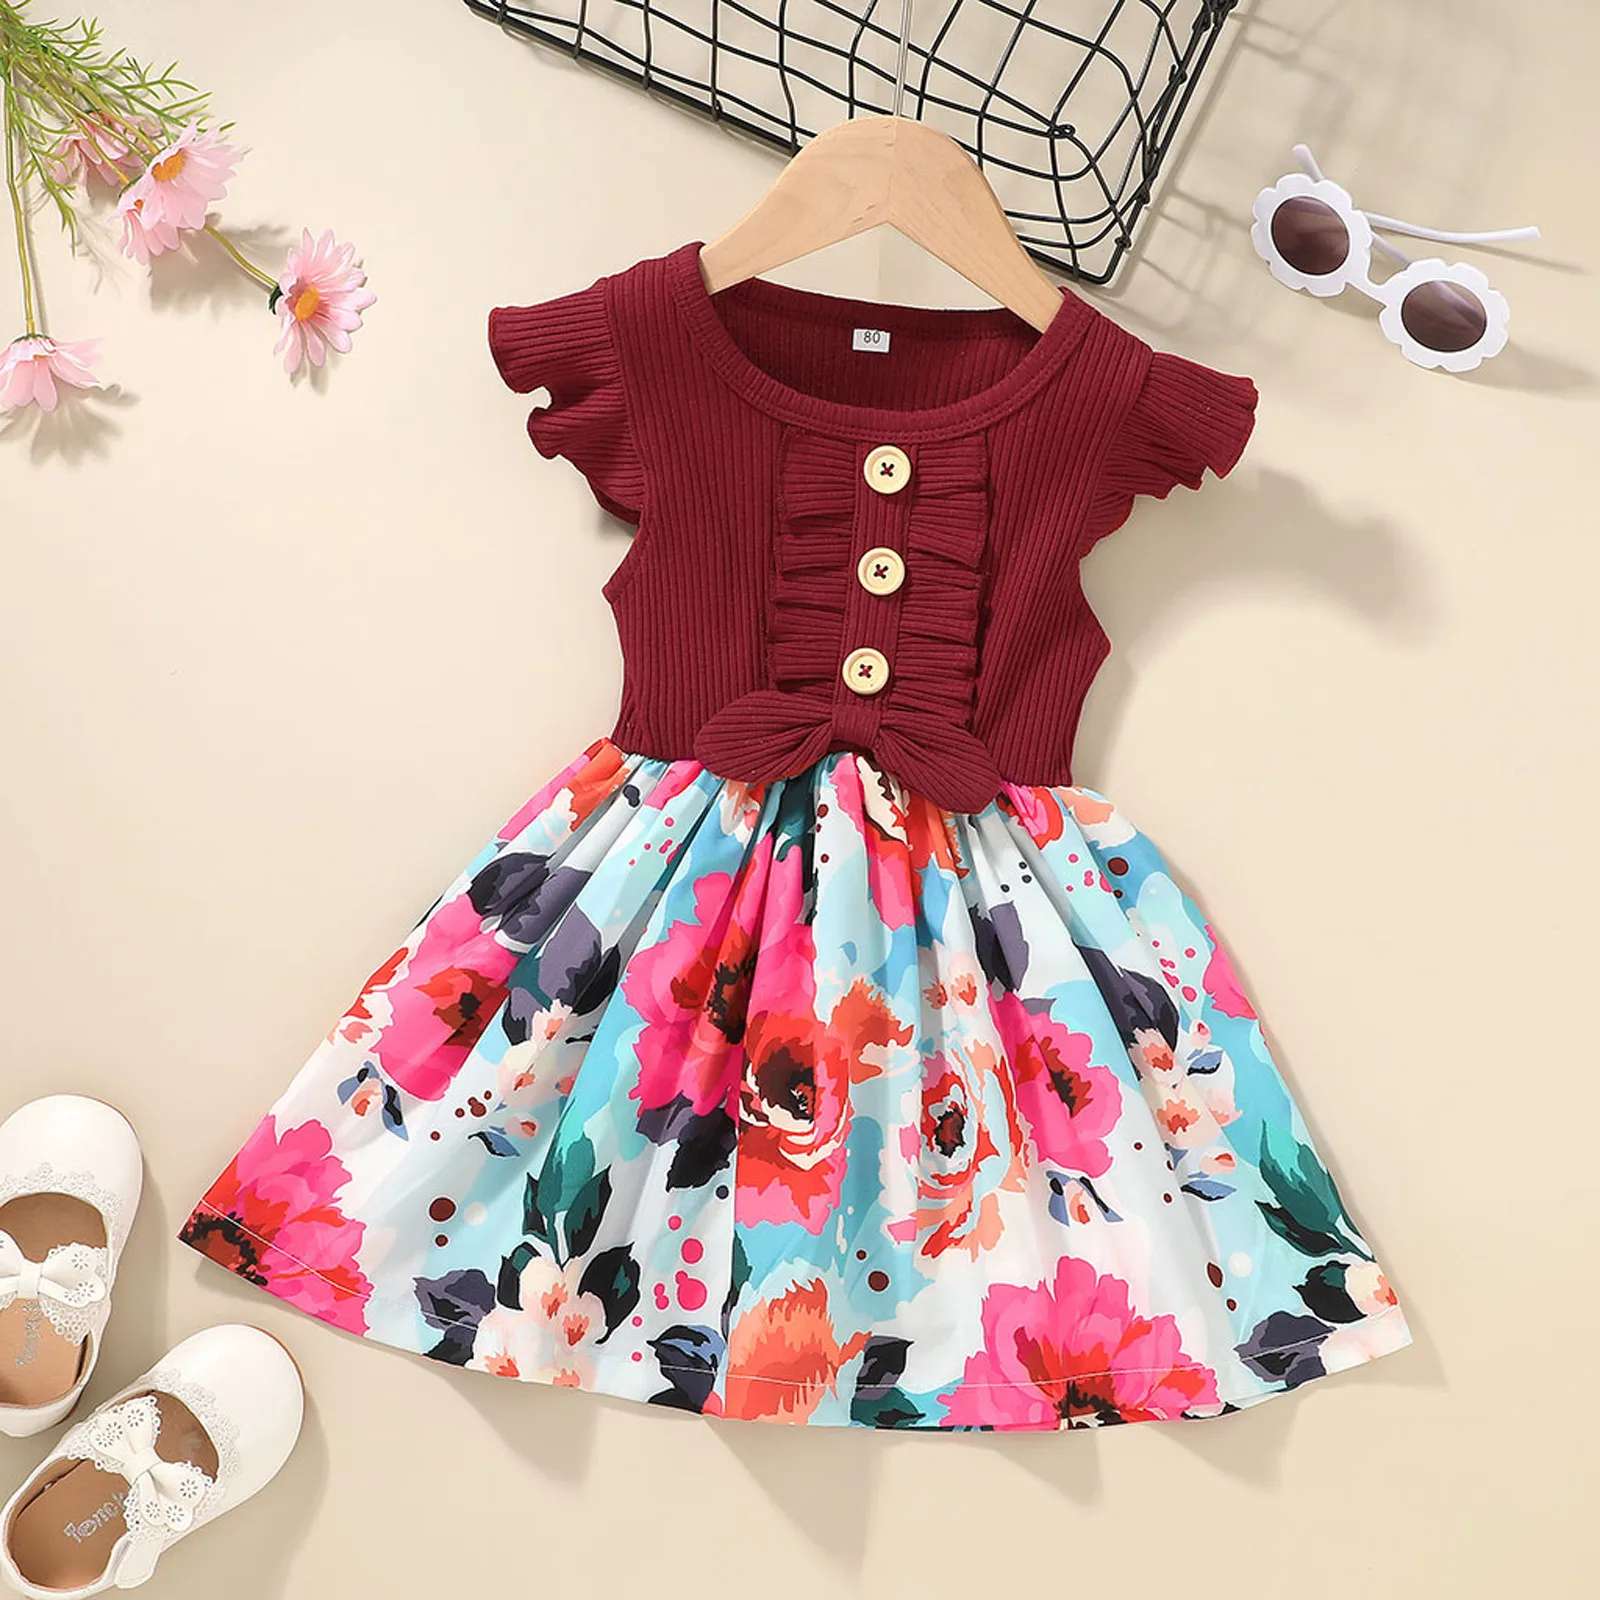 

2021 New Pudcoco Dress Summer 1-5Years Baby Girls Bowknot Floral Print Ruffles Sleeve Patchwork Length A-Line Sundress